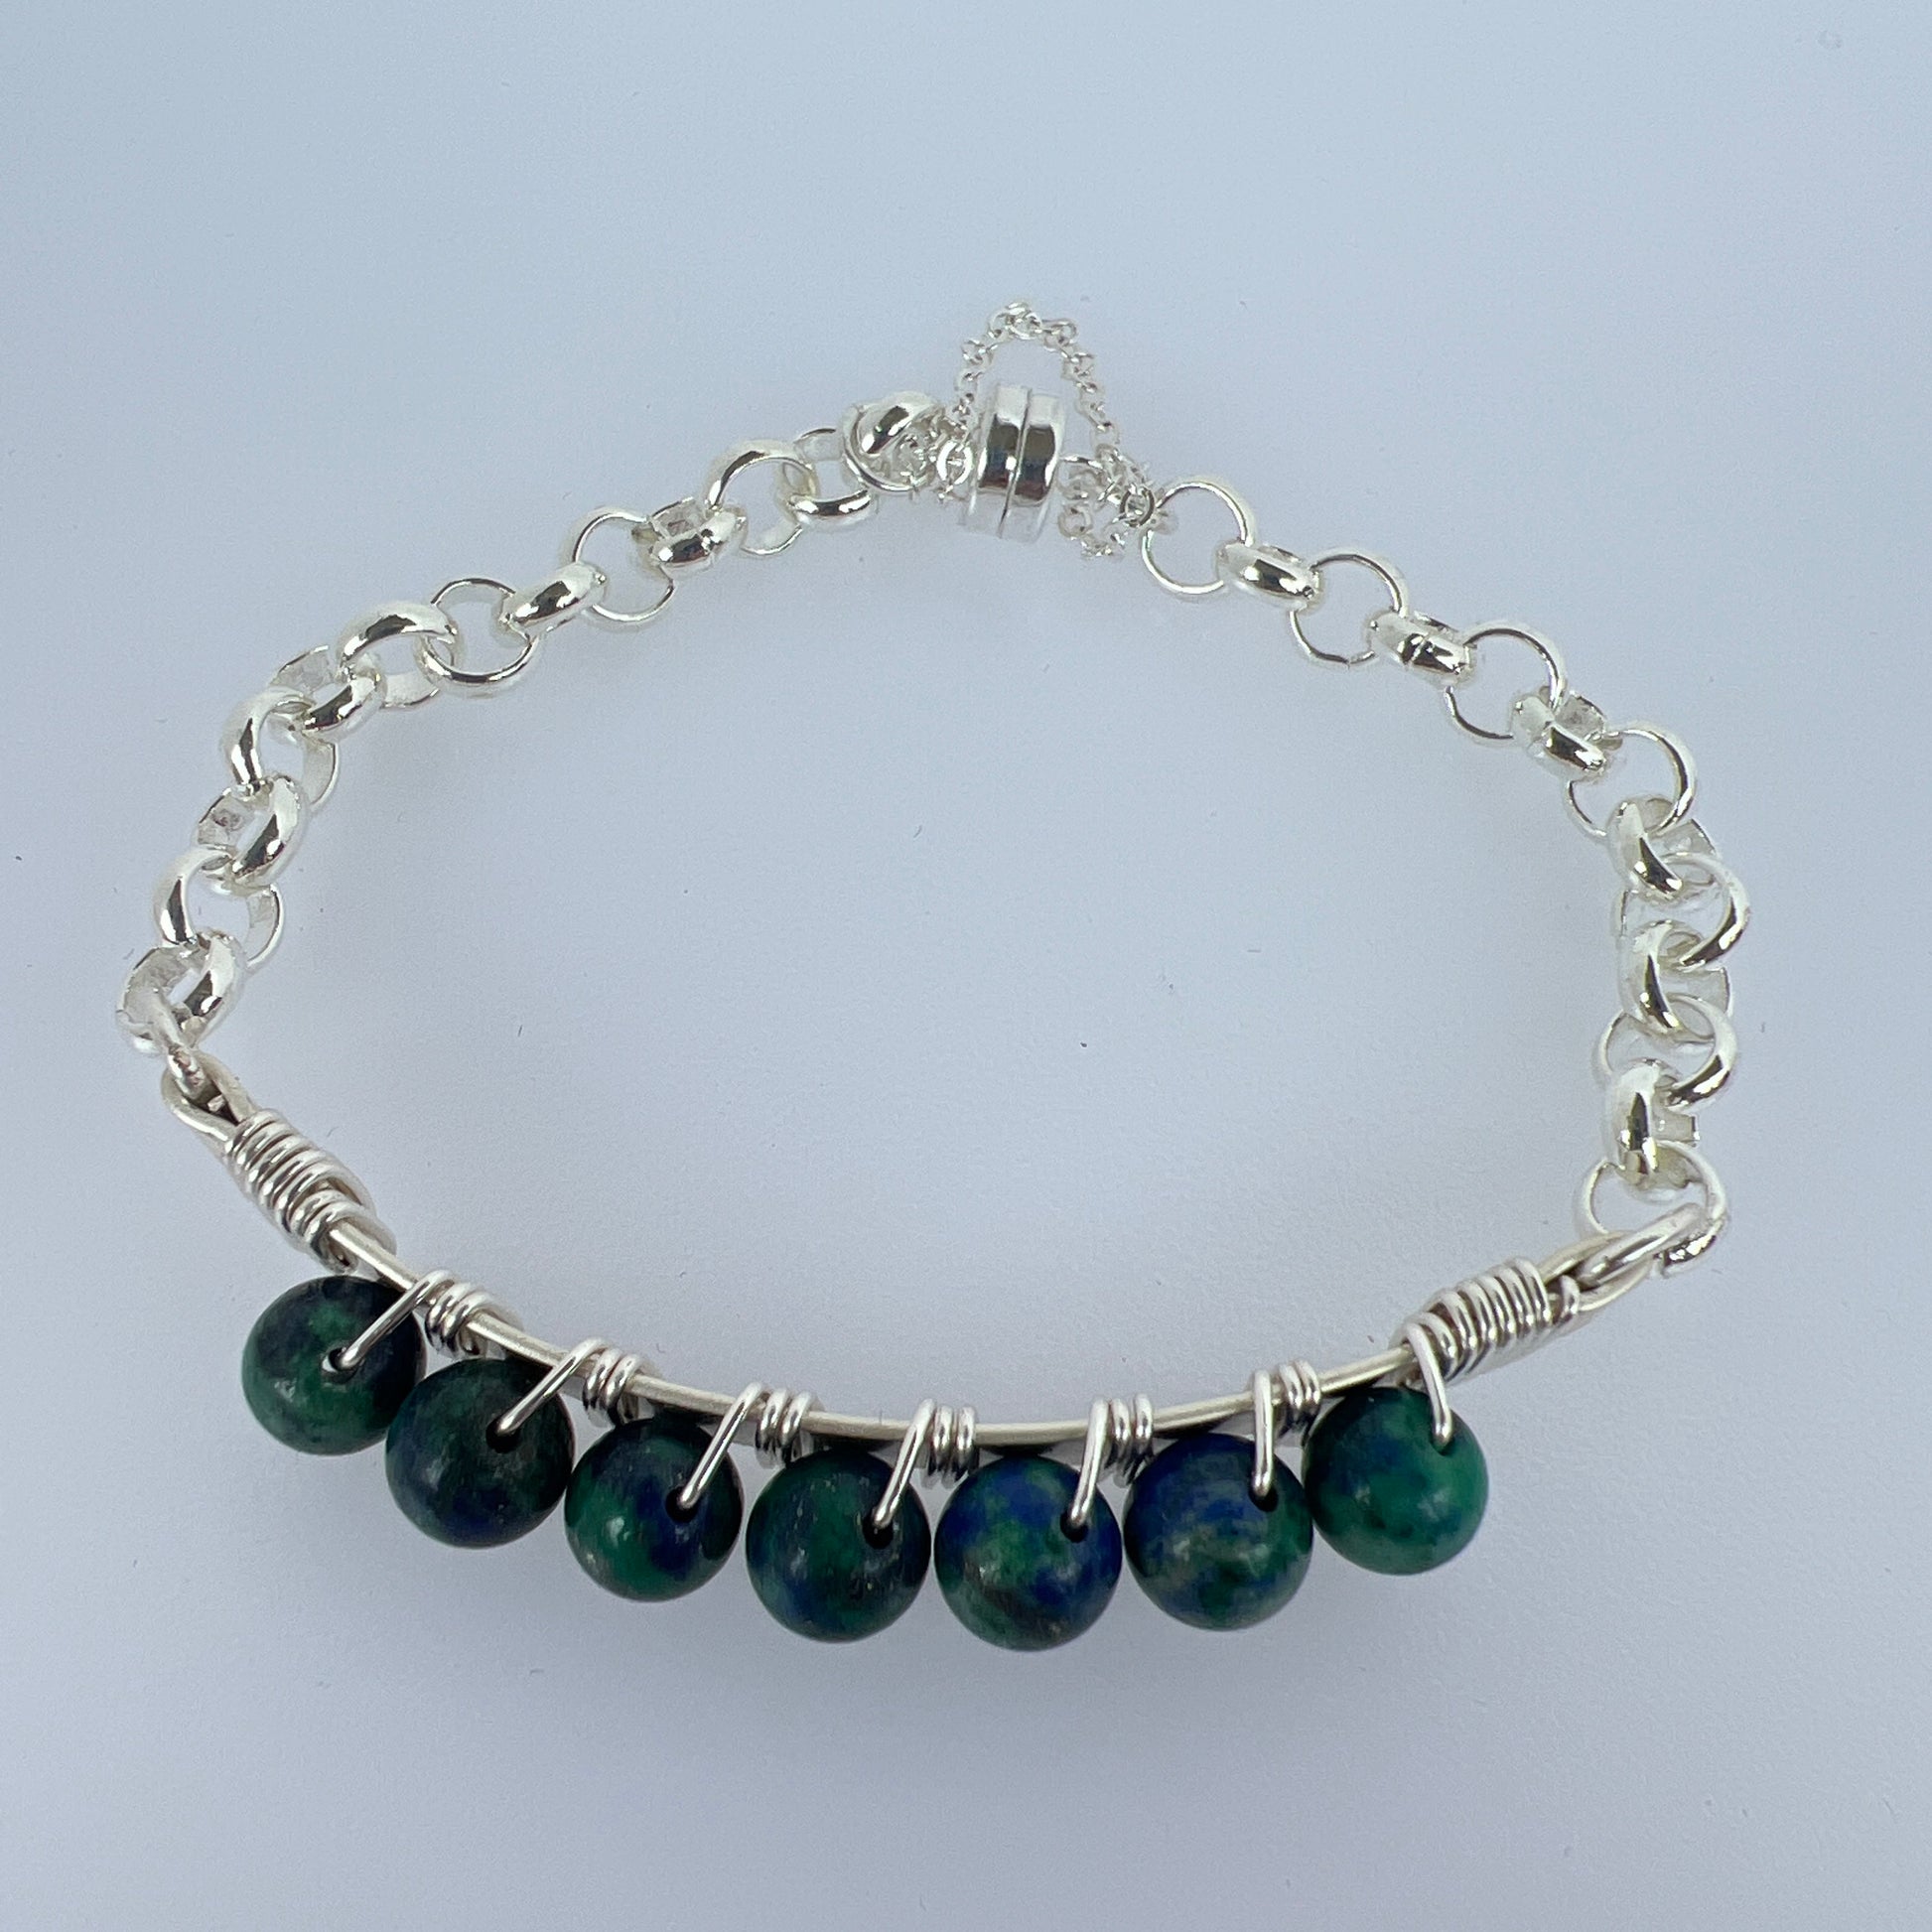 6mm chrysocolla beads wire wrapped on silver plated with silver plate magnet bracelet